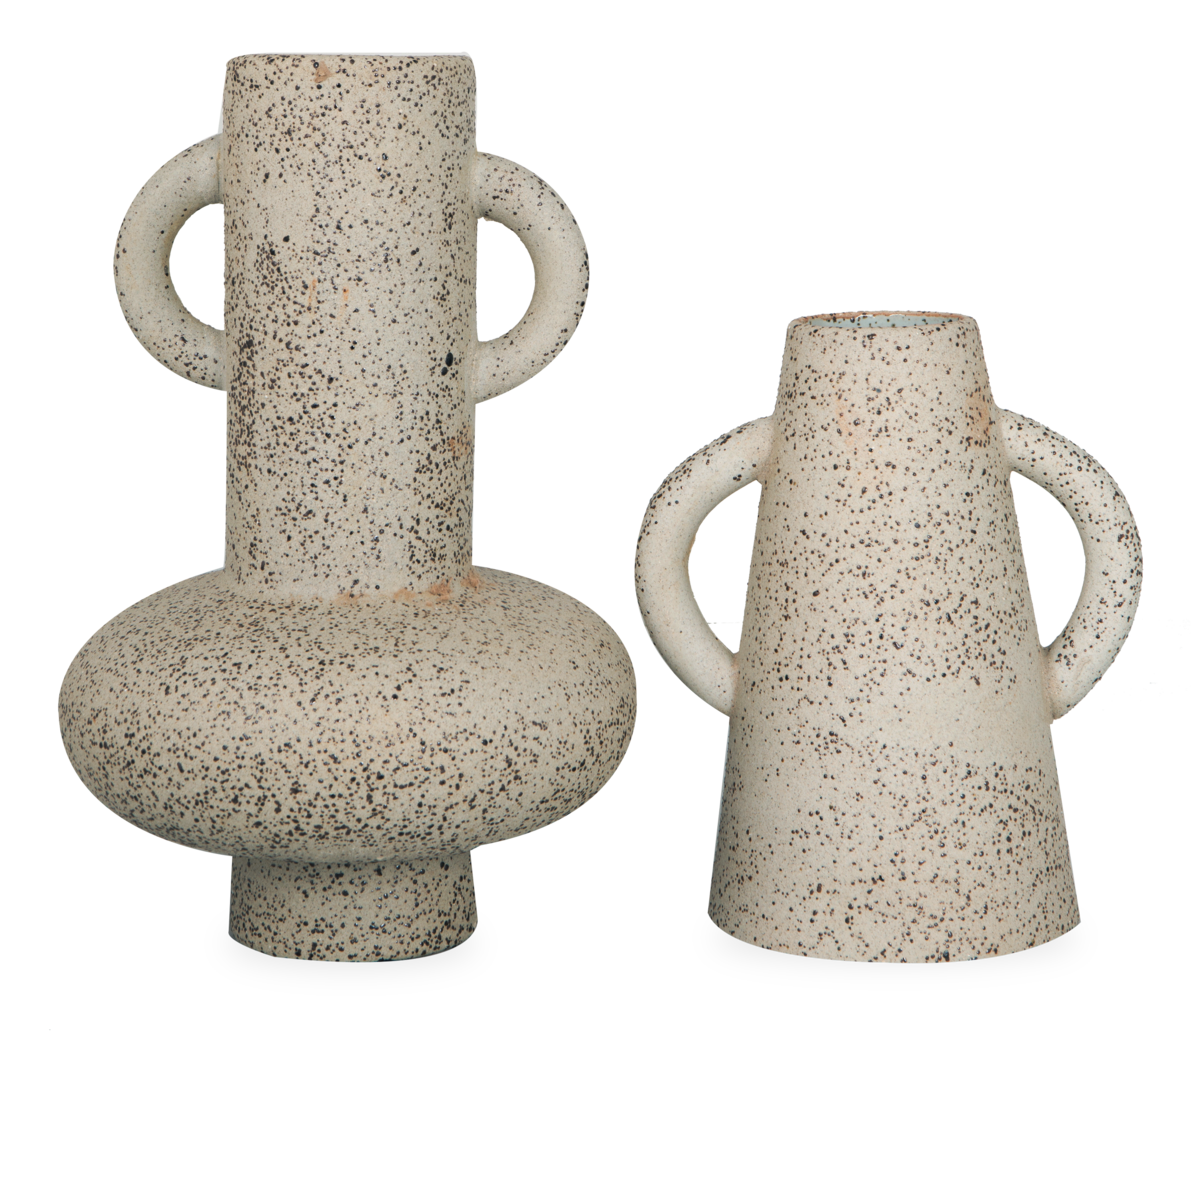 Defined by its sophisticated design, the modernistic collection of Roux Vases allows simplistic shapes and earthy materials to draw interest.